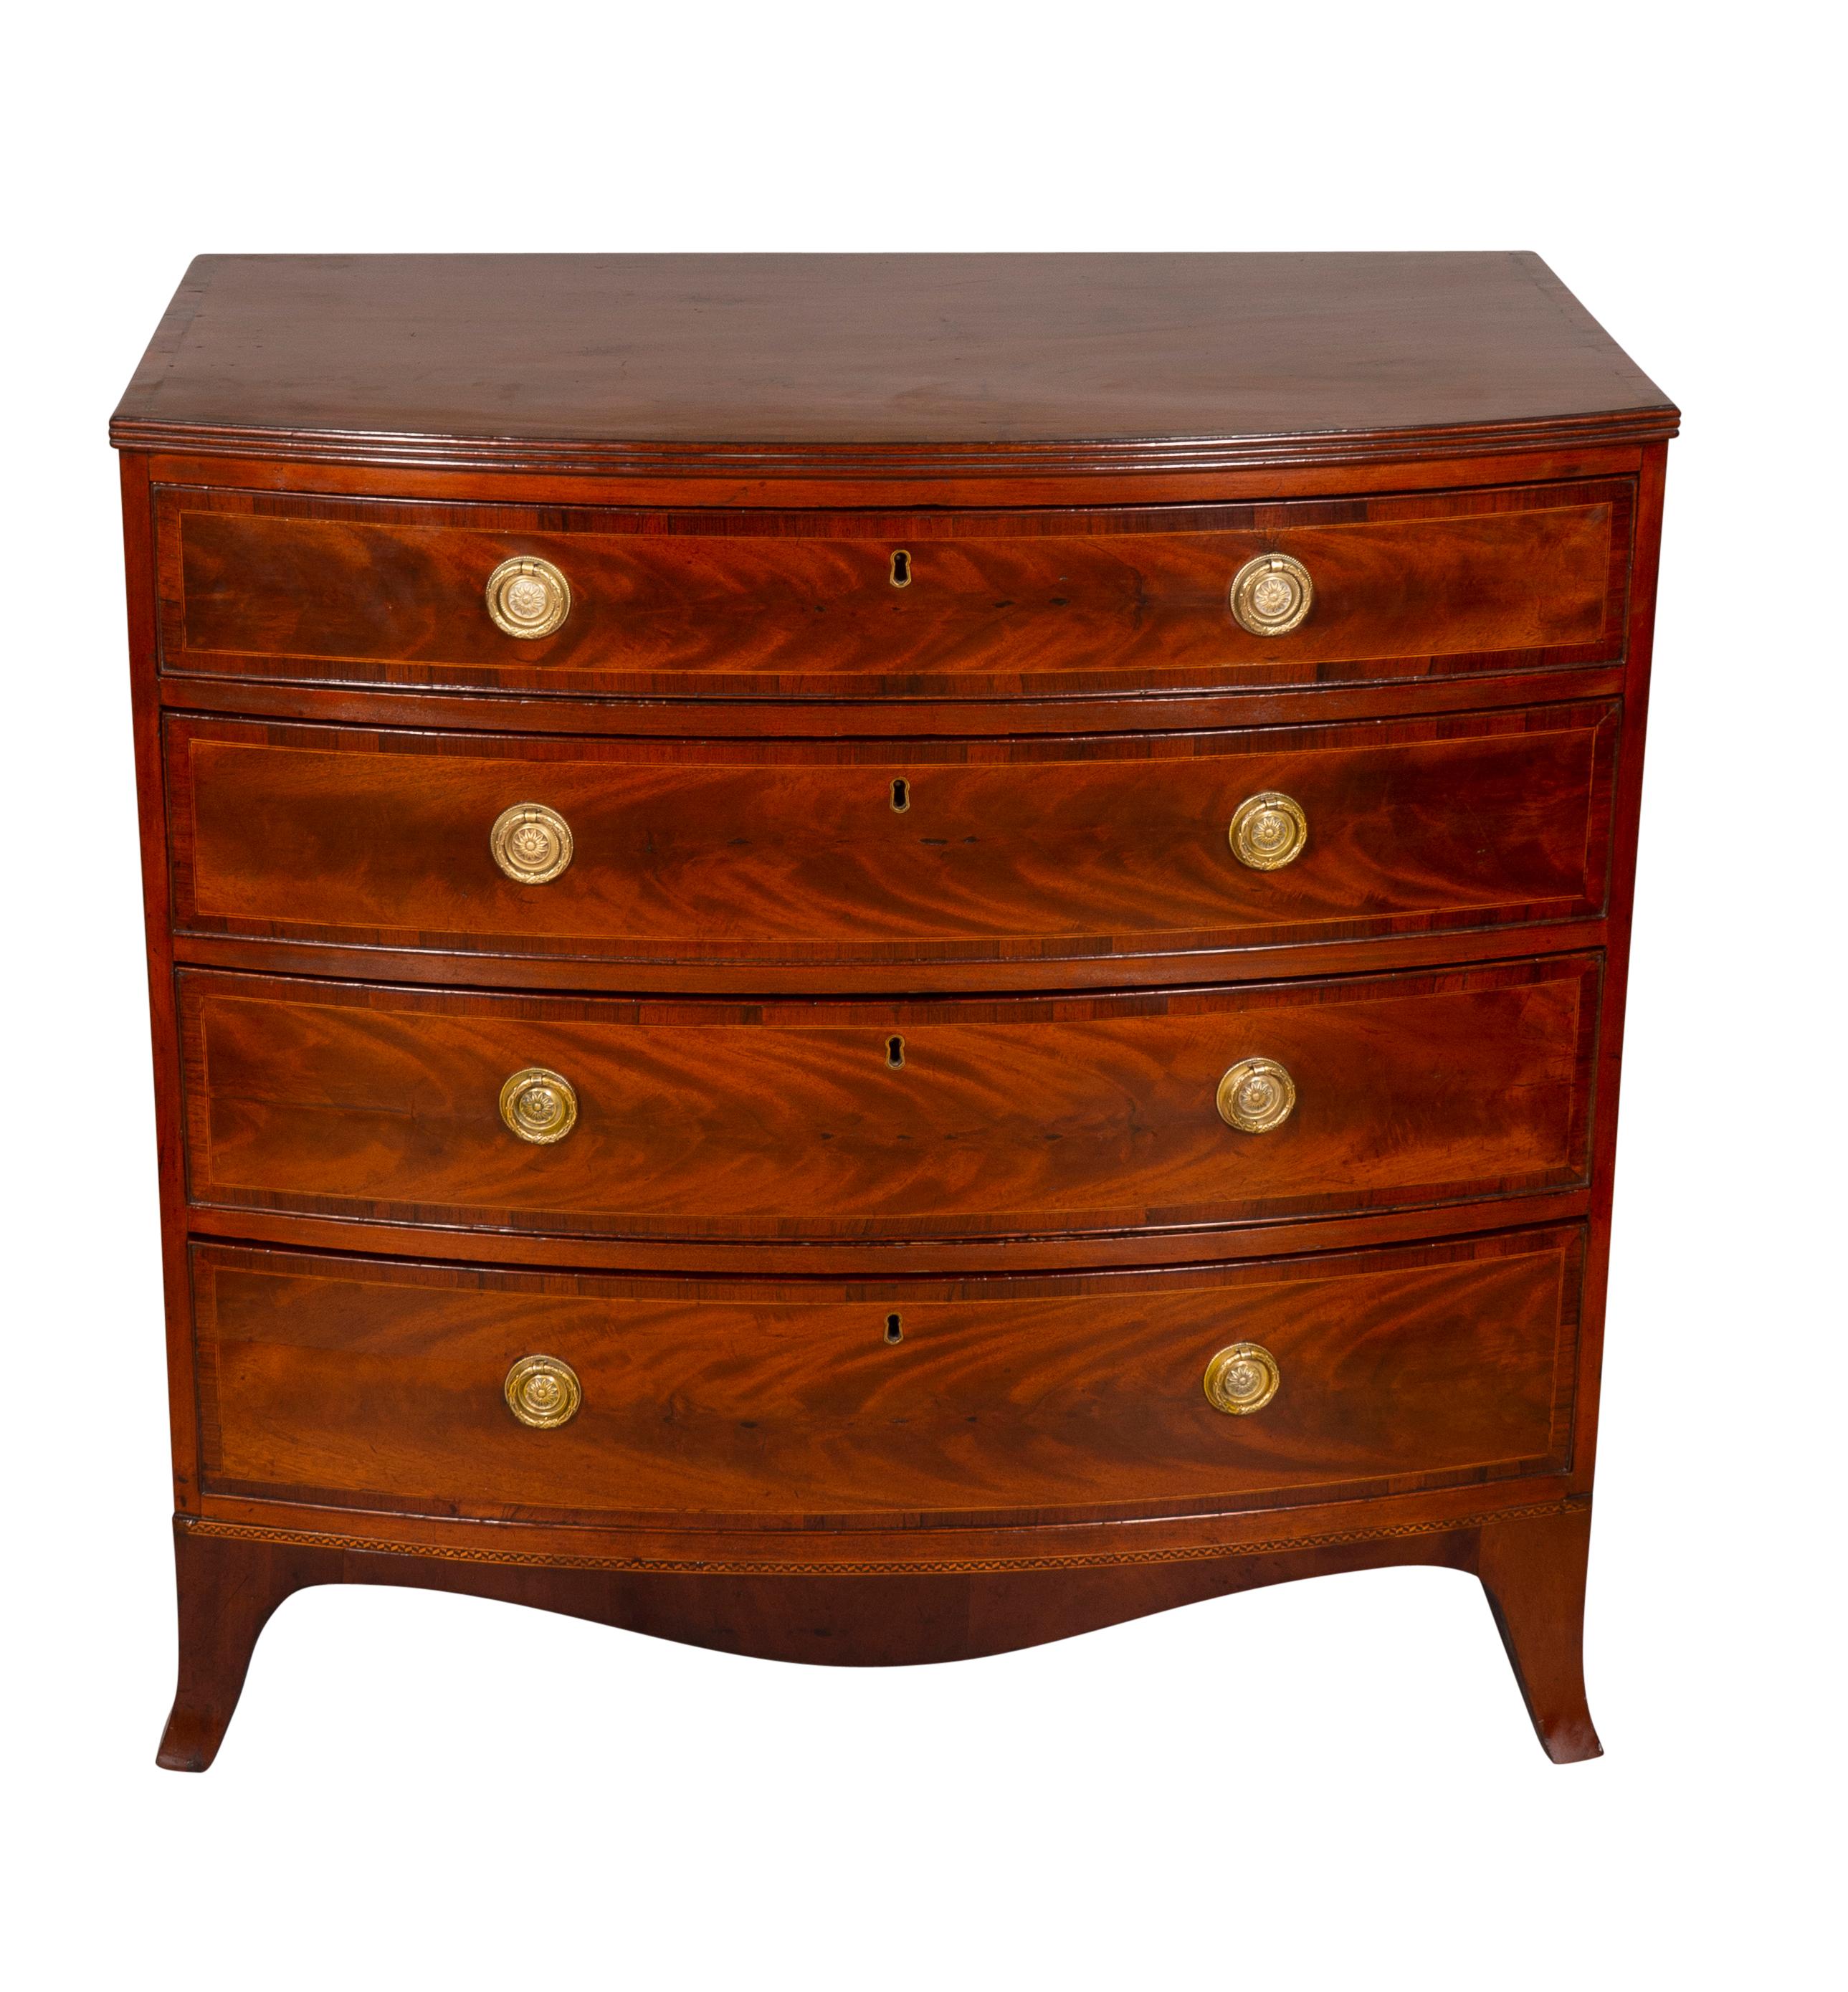 Rectangular cross banded bowed top over four graduated cross banded drawers with figured veneers, round brass handles and ending on French splayed feet.